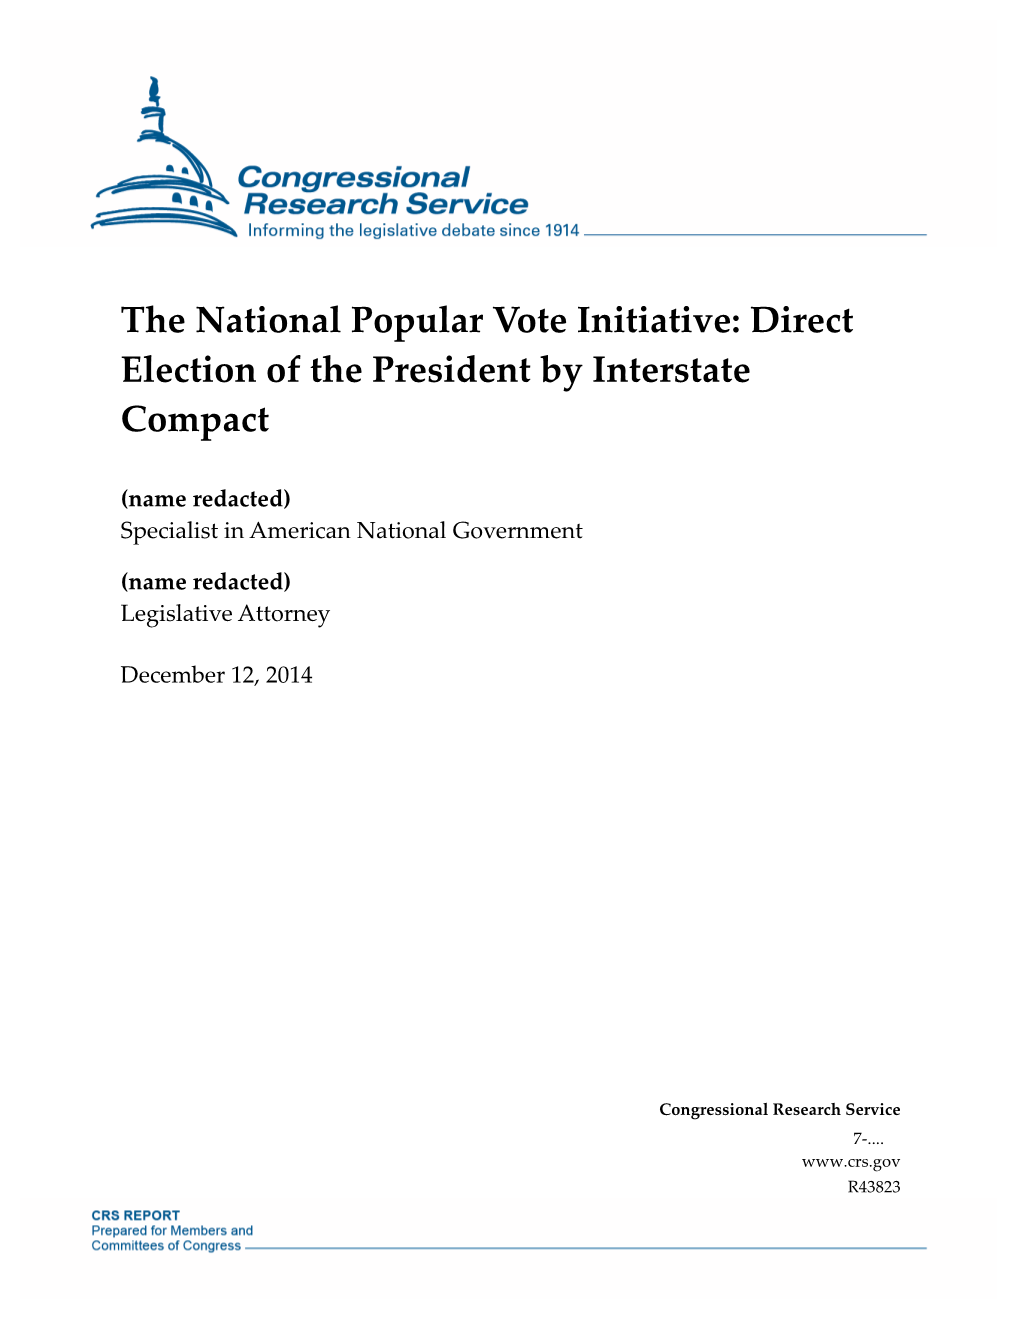 Direct Election of the President by Interstate Compact